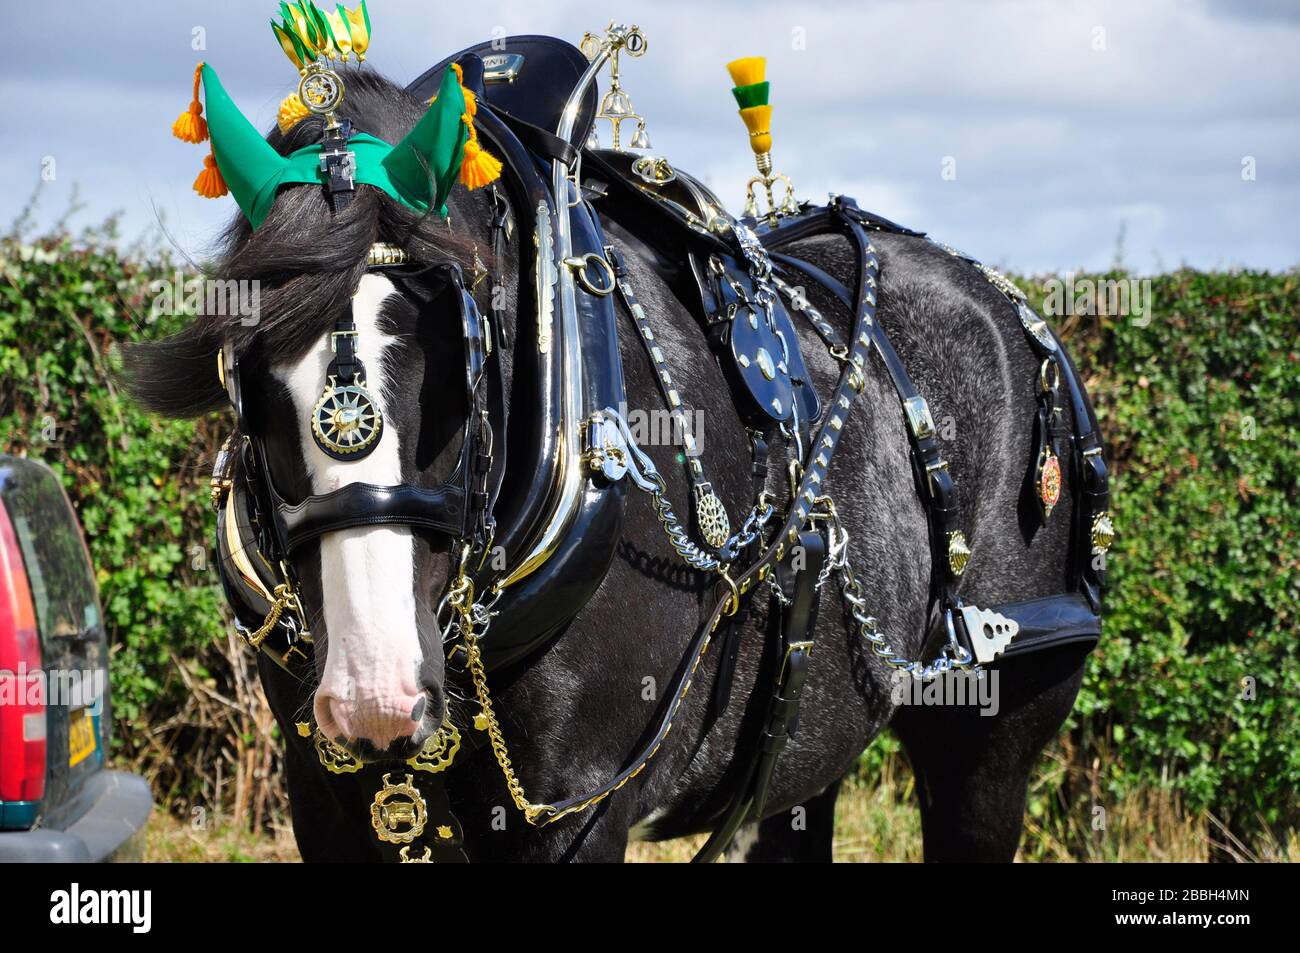 https://c8.alamy.com/comp/2BBH4MN/shire-horse-waits-in-its-full-brass-decorated-harness-for-a-competition-in-a-country-showoxfordshire-uk-2BBH4MN.jpg